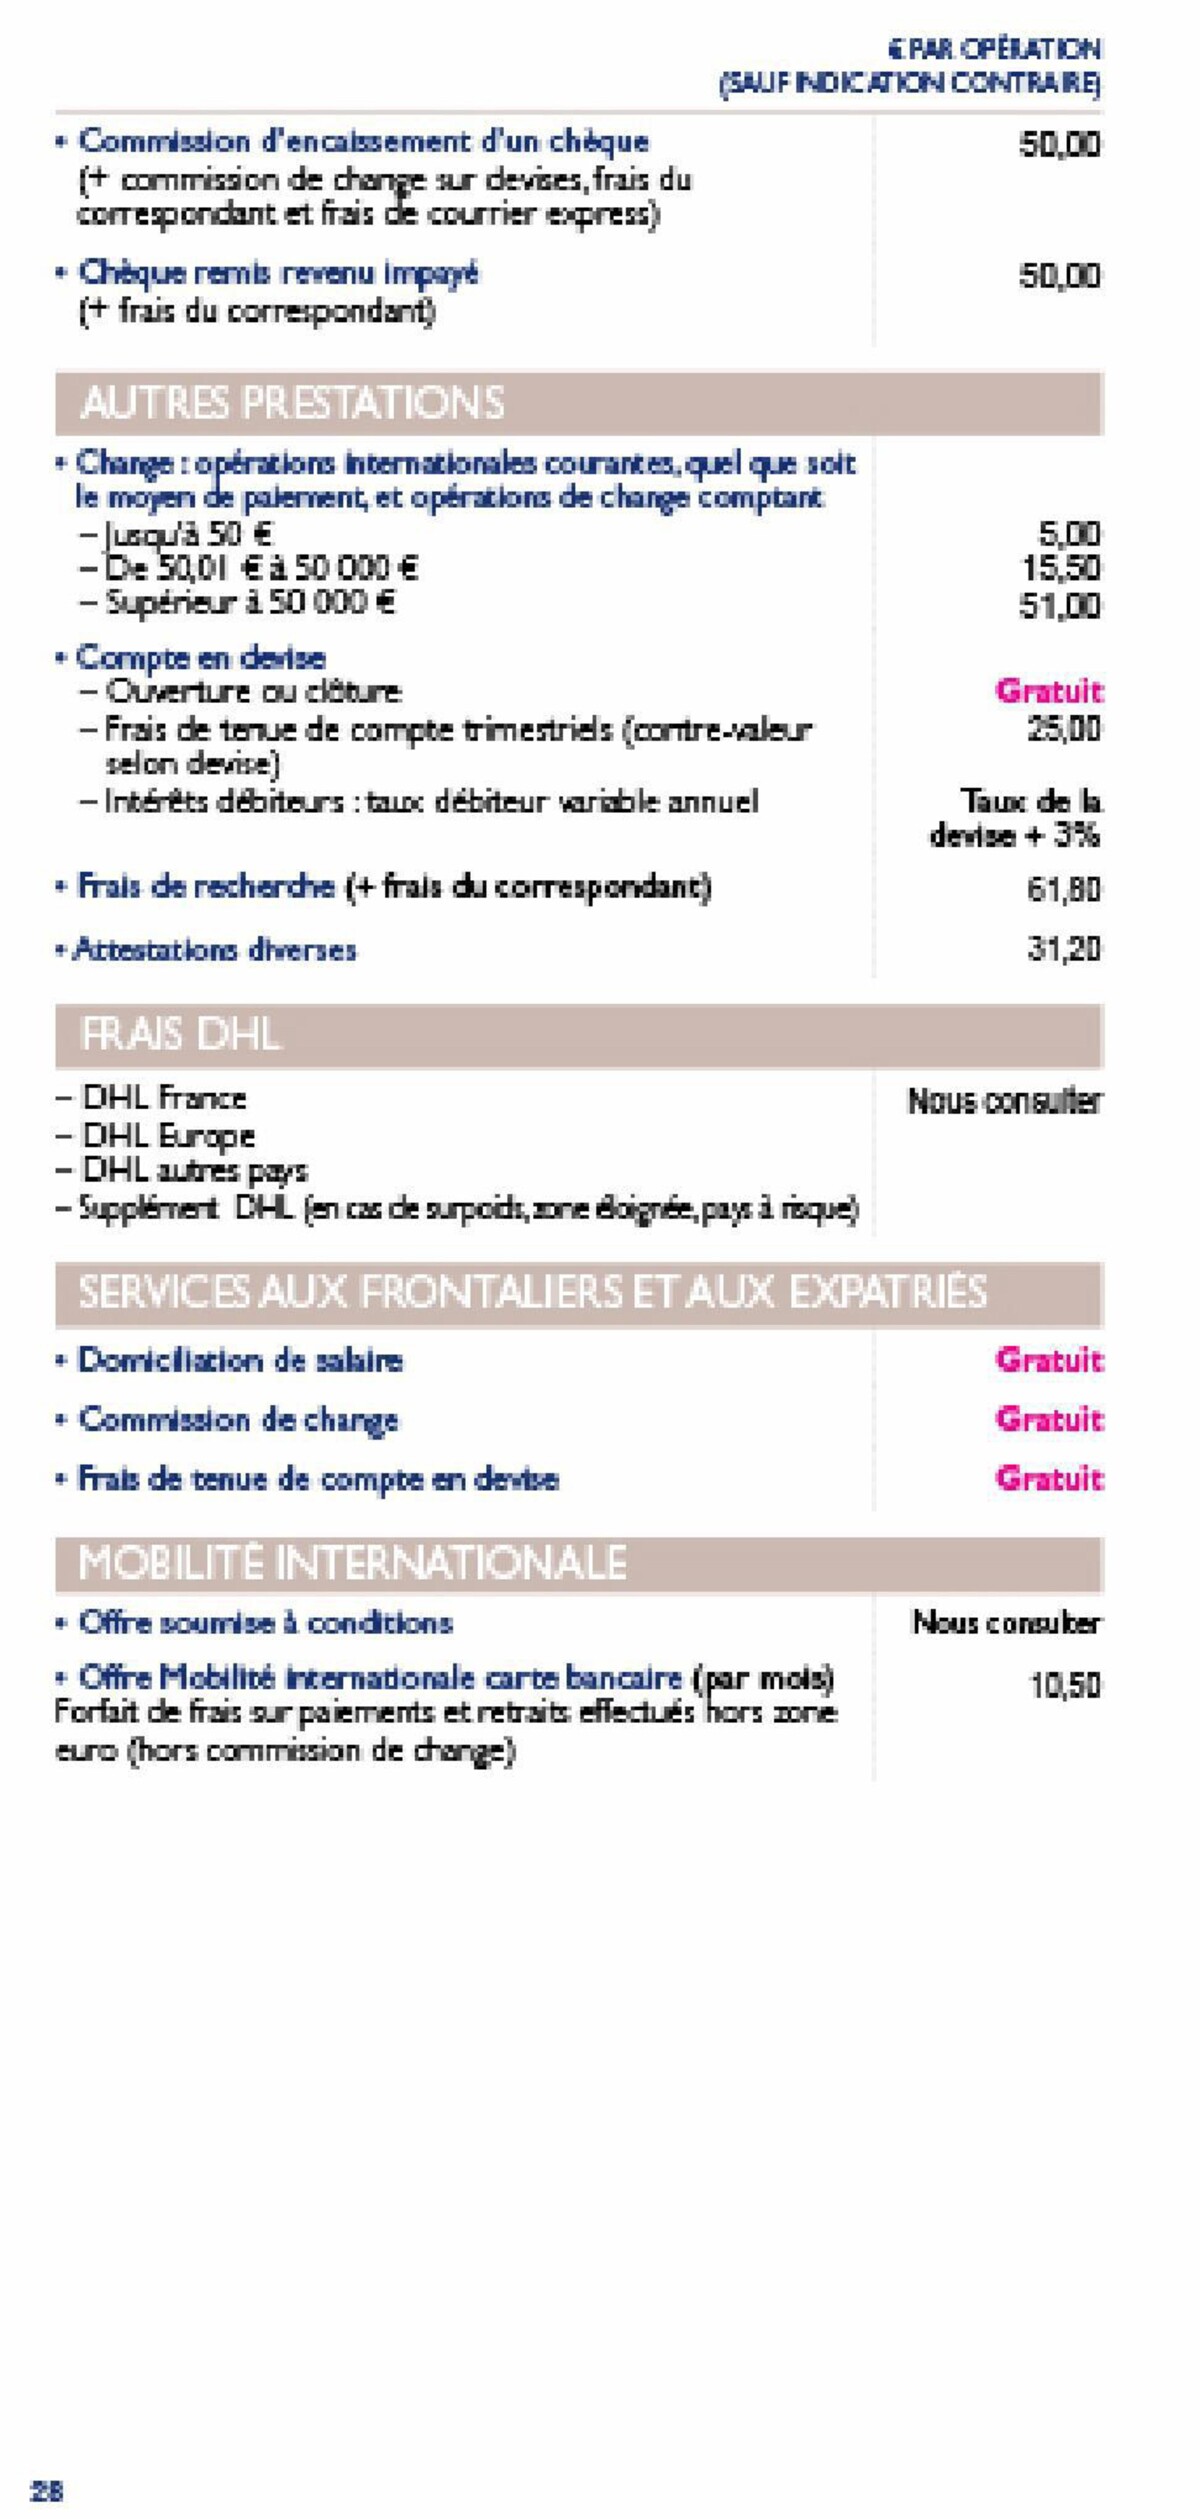 Catalogue Bpalc tarifs particuliers , page 00028